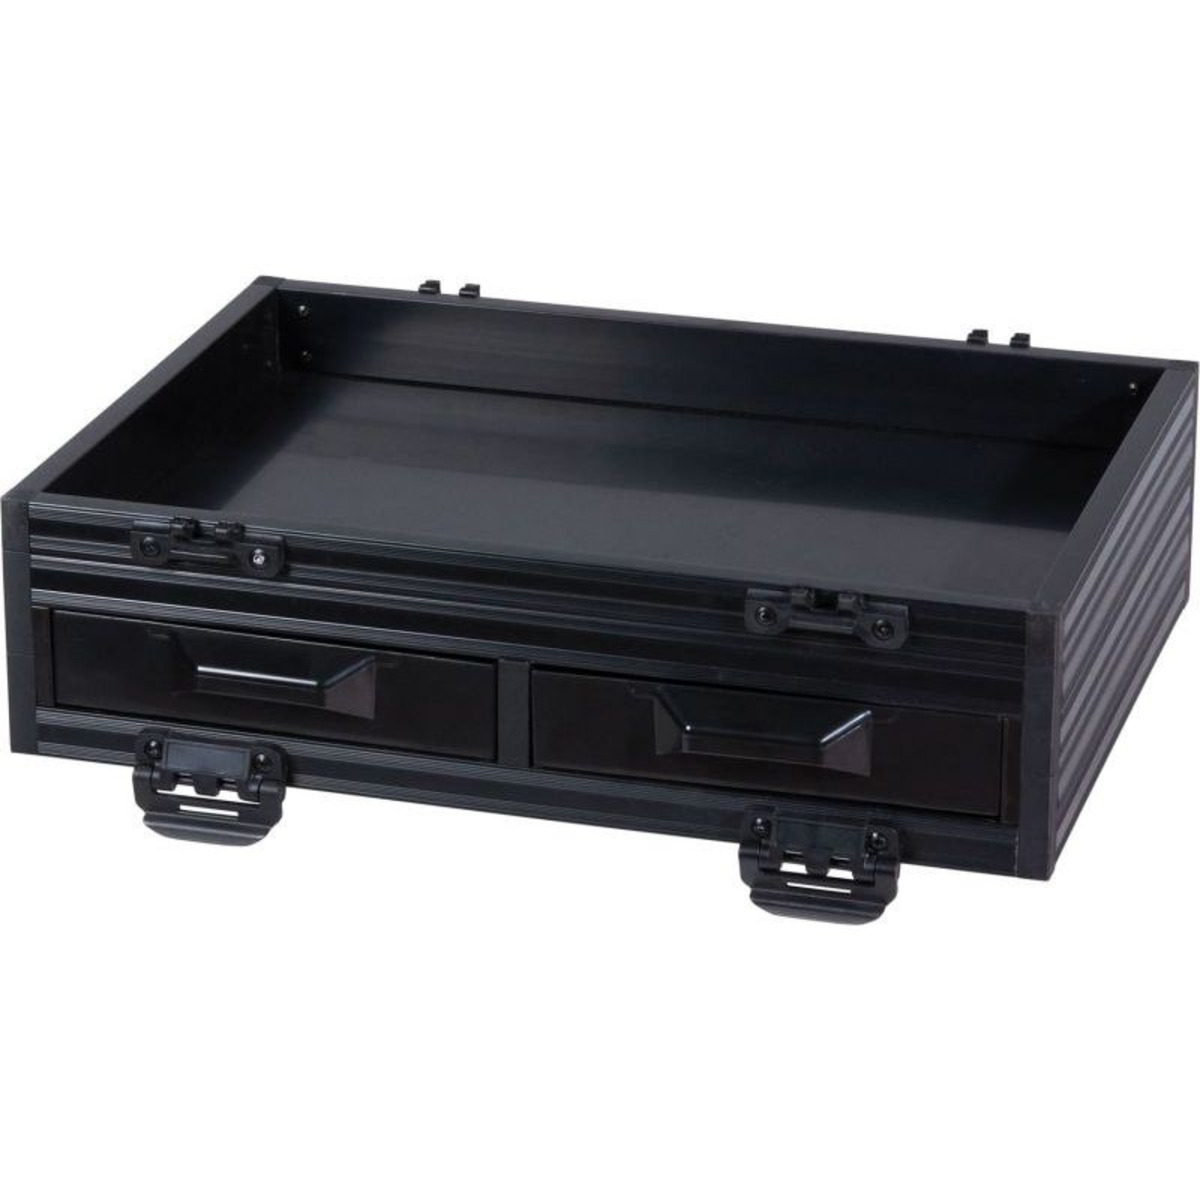 Trabucco Module H 80 - 2 X Front Drawers - Module H80 - 2 x Front Drawers